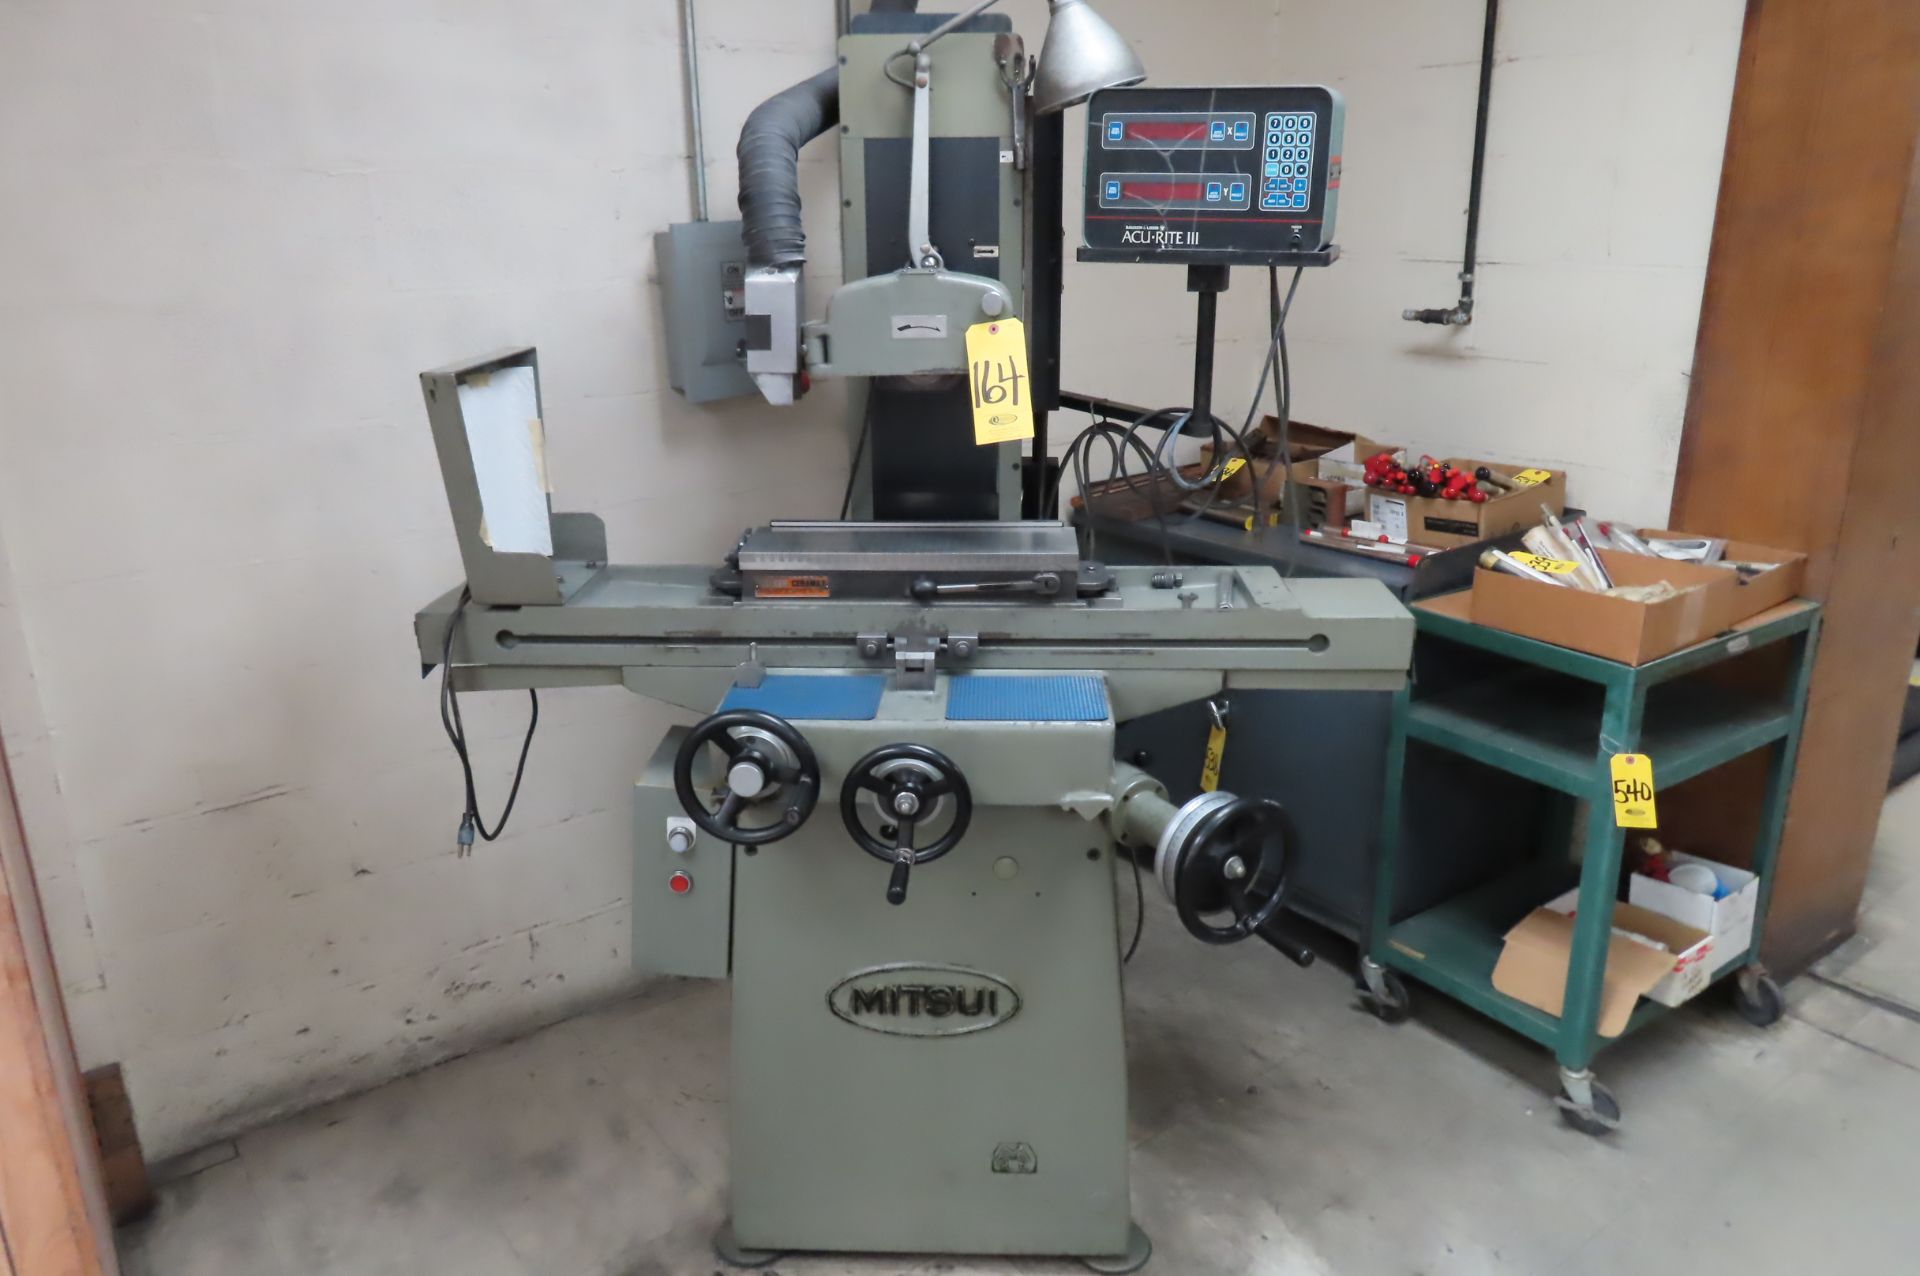 MITSUI MSG-205MH HANDFEED SURFACE GRINDER, S/N 83061735, WITH 6 X 18 IN. WALKER PERMANENT MAGNETIC